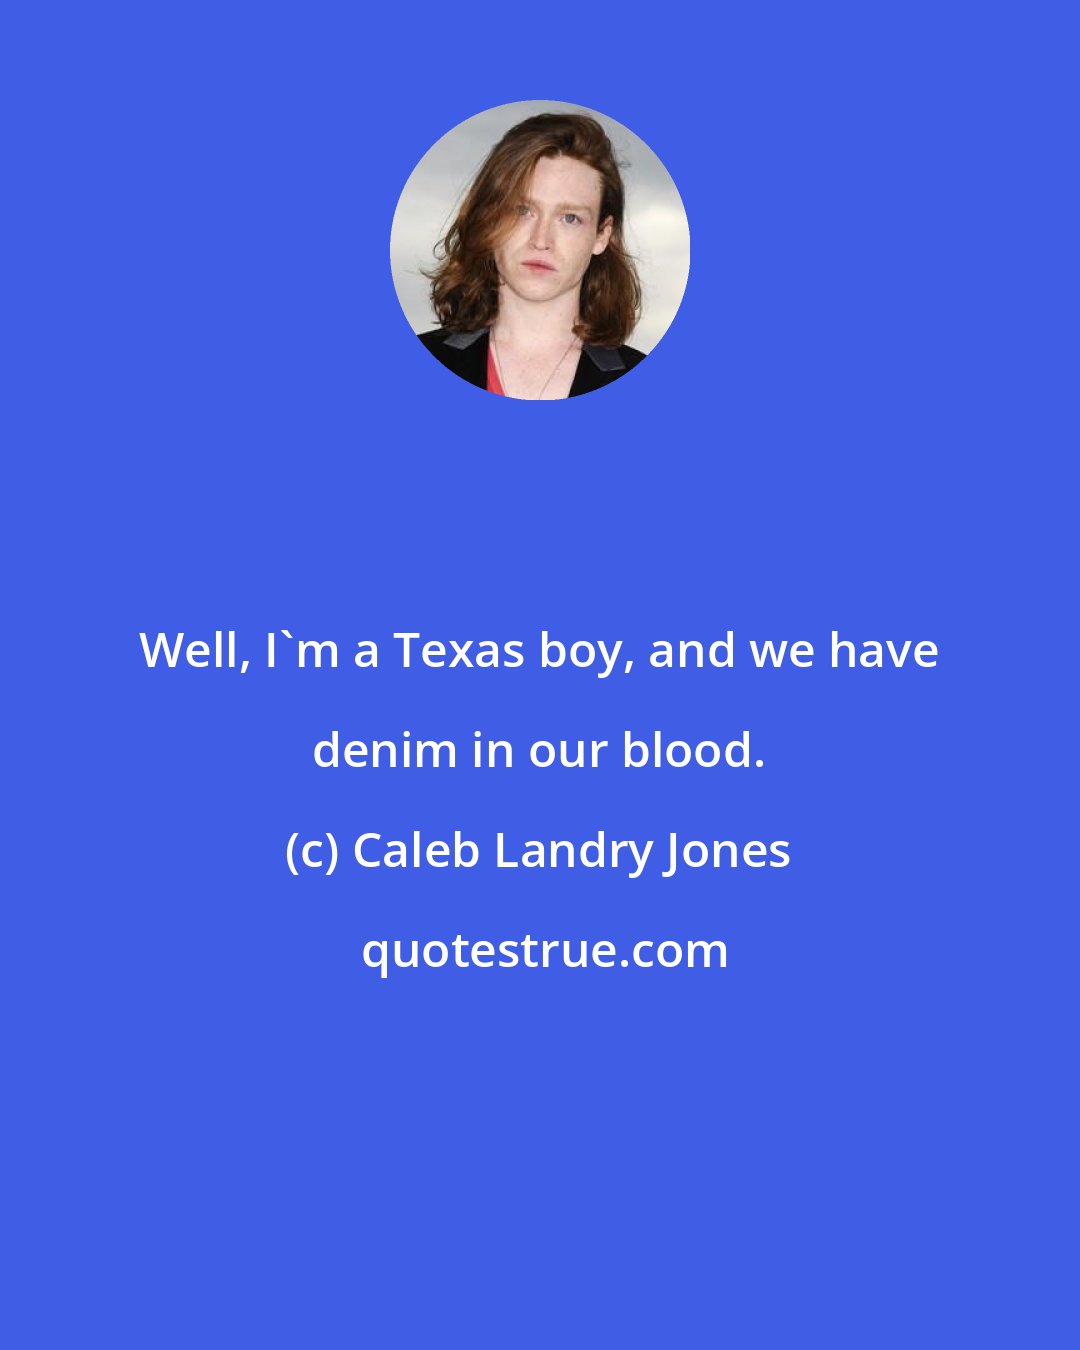 Caleb Landry Jones: Well, I'm a Texas boy, and we have denim in our blood.